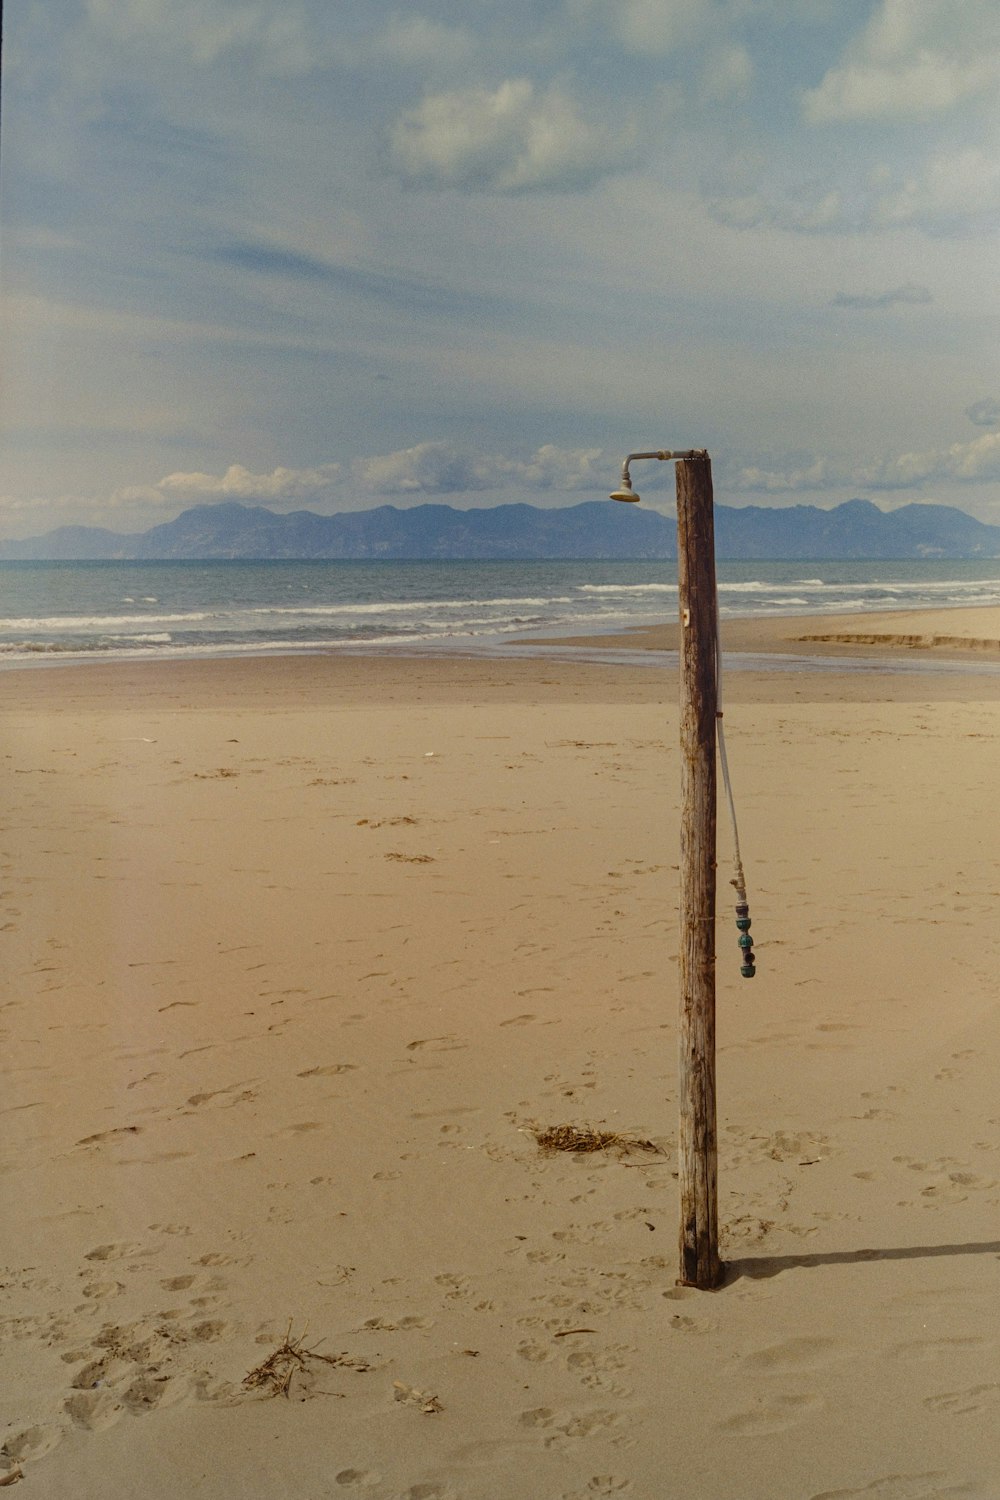 a wooden pole sticking out of the sand on a beach